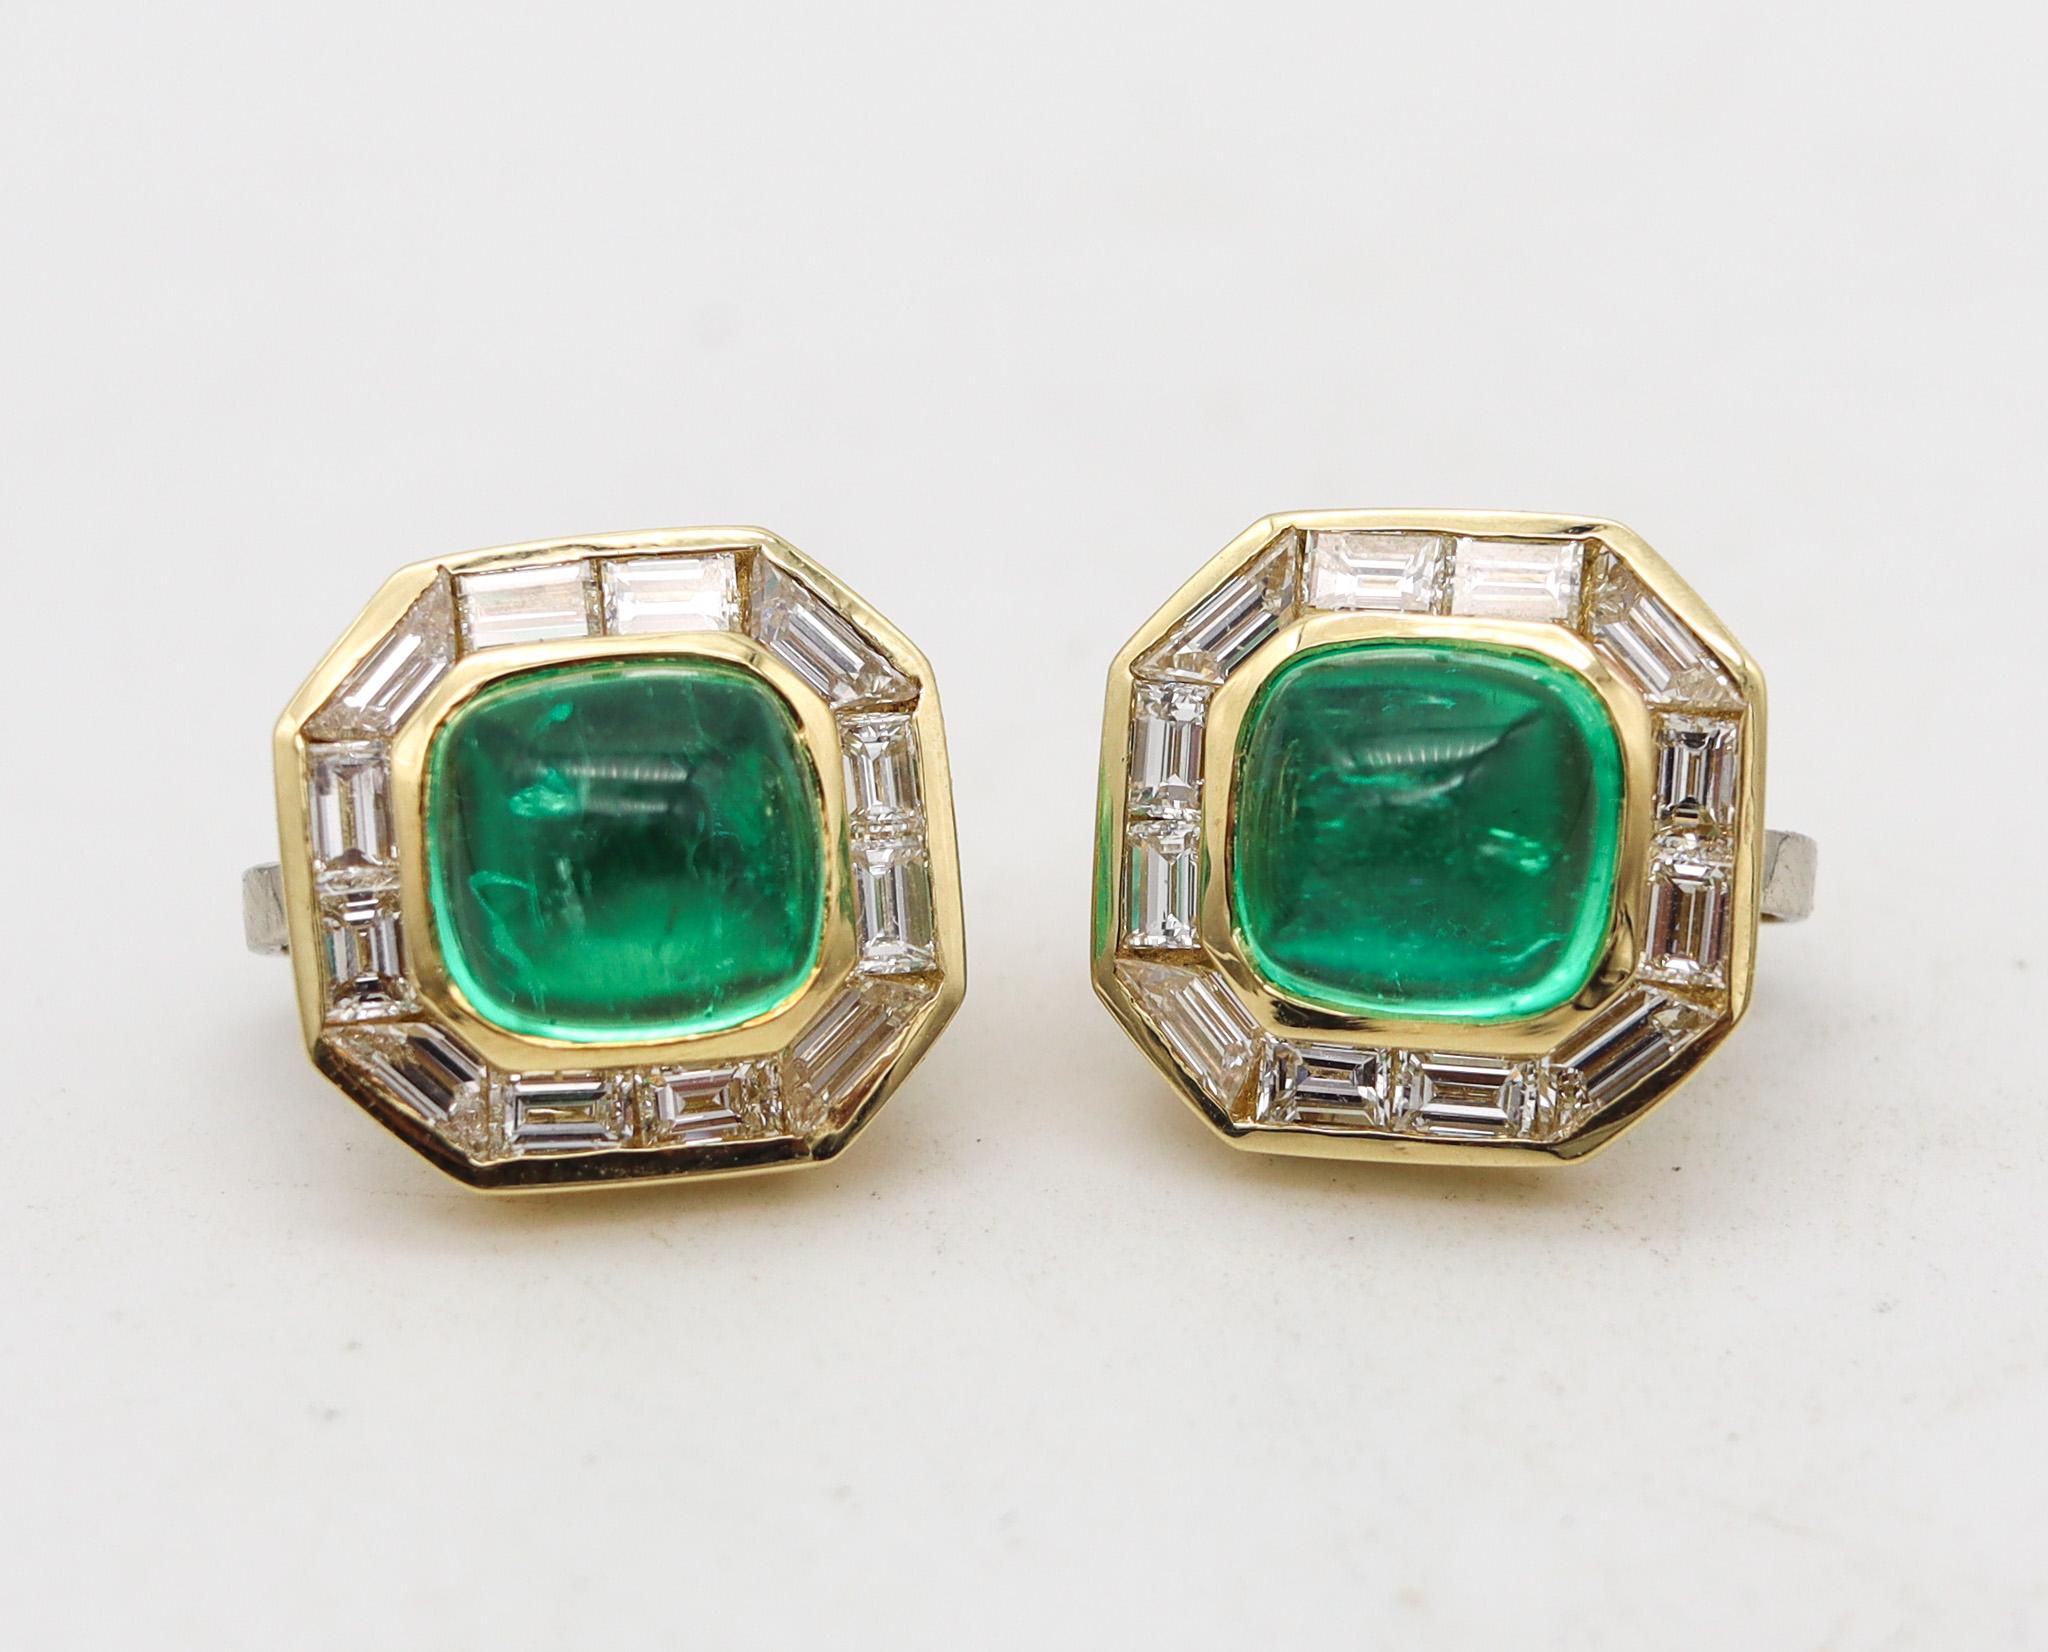 Gems set earrings designed by Bvlgari.

Outstanding and very rare pair of clips-on earrings, created in Milano Italy by the jewelry house of Bvlgari. This gorgeous pair has been crafted in solid yellow gold of 18 karats, with high polished finish.